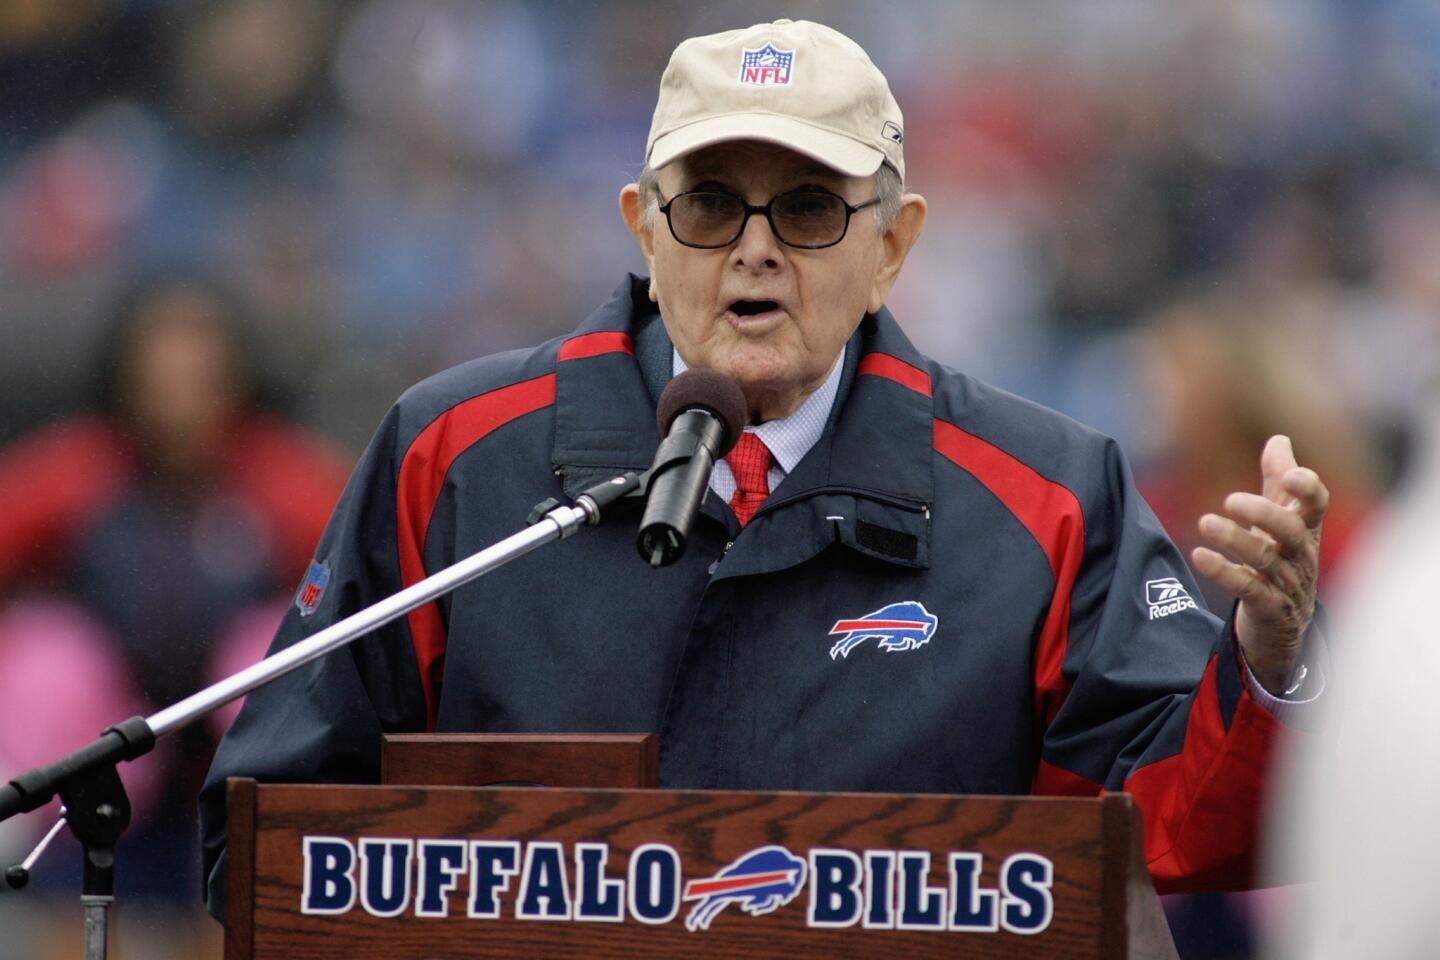 In 1959, Wilson founded the Buffalo Bills with a $25,000 investment and turned the team into western New York's defining institution. He co-founded the American Football League in 1960. He was 95.